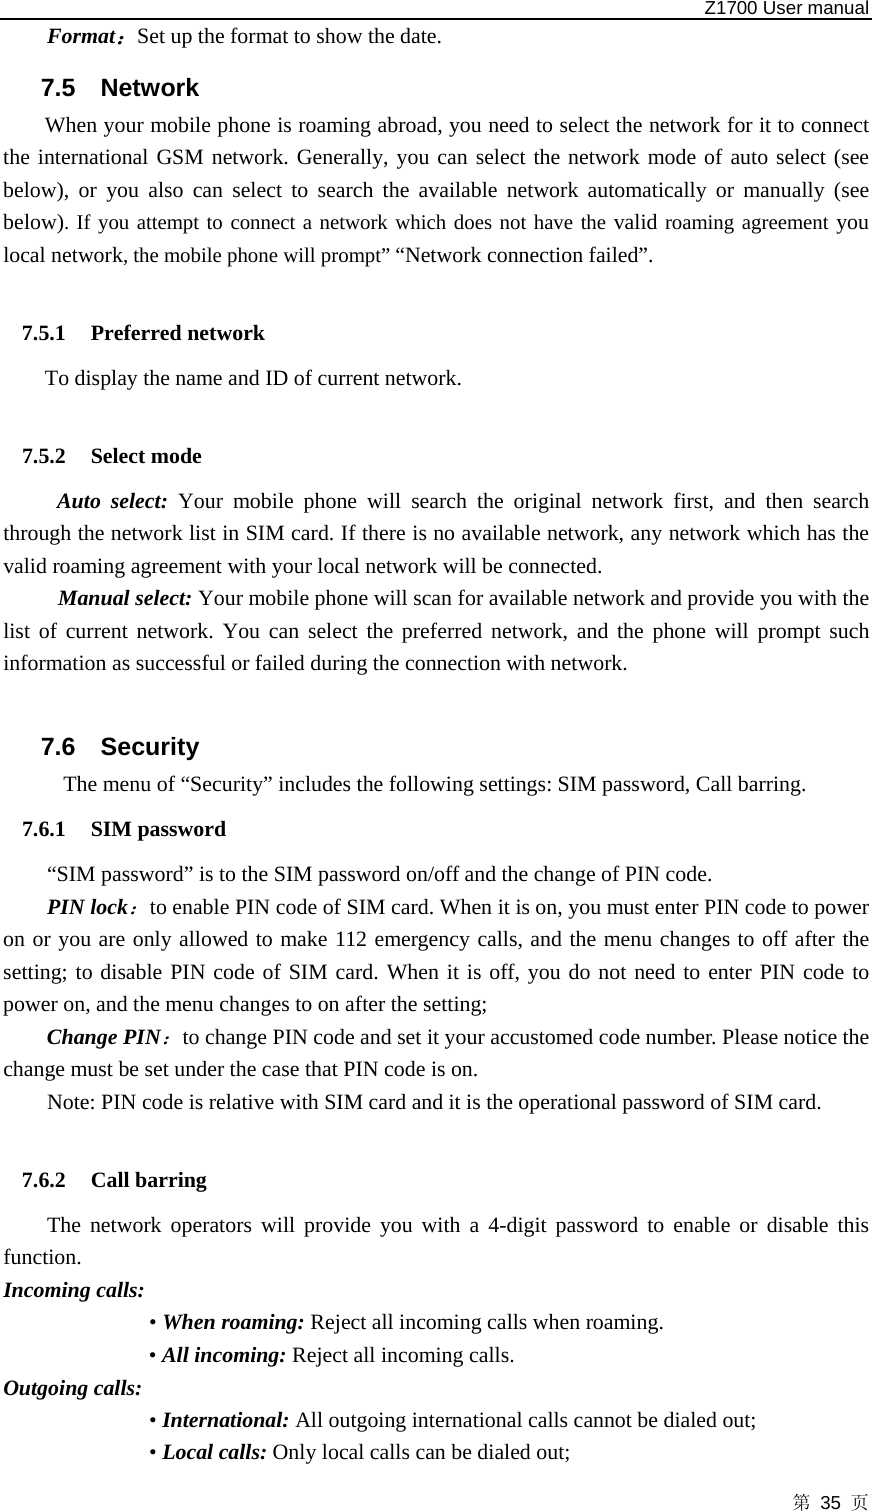   Z1700 User manual 第 35 页 Format：Set up the format to show the date. 7.5 Network  When your mobile phone is roaming abroad, you need to select the network for it to connect the international GSM network. Generally, you can select the network mode of auto select (see below), or you also can select to search the available network automatically or manually (see below). If you attempt to connect a network which does not have the valid roaming agreement you local network, the mobile phone will prompt” “Network connection failed”.  7.5.1 Preferred network To display the name and ID of current network.    7.5.2 Select mode Auto select: Your mobile phone will search the original network first, and then search through the network list in SIM card. If there is no available network, any network which has the valid roaming agreement with your local network will be connected. Manual select: Your mobile phone will scan for available network and provide you with the list of current network. You can select the preferred network, and the phone will prompt such information as successful or failed during the connection with network.  7.6 Security  The menu of “Security” includes the following settings: SIM password, Call barring. 7.6.1 SIM password “SIM password” is to the SIM password on/off and the change of PIN code.   PIN lock：to enable PIN code of SIM card. When it is on, you must enter PIN code to power on or you are only allowed to make 112 emergency calls, and the menu changes to off after the setting; to disable PIN code of SIM card. When it is off, you do not need to enter PIN code to power on, and the menu changes to on after the setting;   Change PIN：to change PIN code and set it your accustomed code number. Please notice the change must be set under the case that PIN code is on.   Note: PIN code is relative with SIM card and it is the operational password of SIM card.  7.6.2 Call barring The network operators will provide you with a 4-digit password to enable or disable this function.  Incoming calls:   • When roaming: Reject all incoming calls when roaming. • All incoming: Reject all incoming calls. Outgoing calls: • International: All outgoing international calls cannot be dialed out;   • Local calls: Only local calls can be dialed out;   